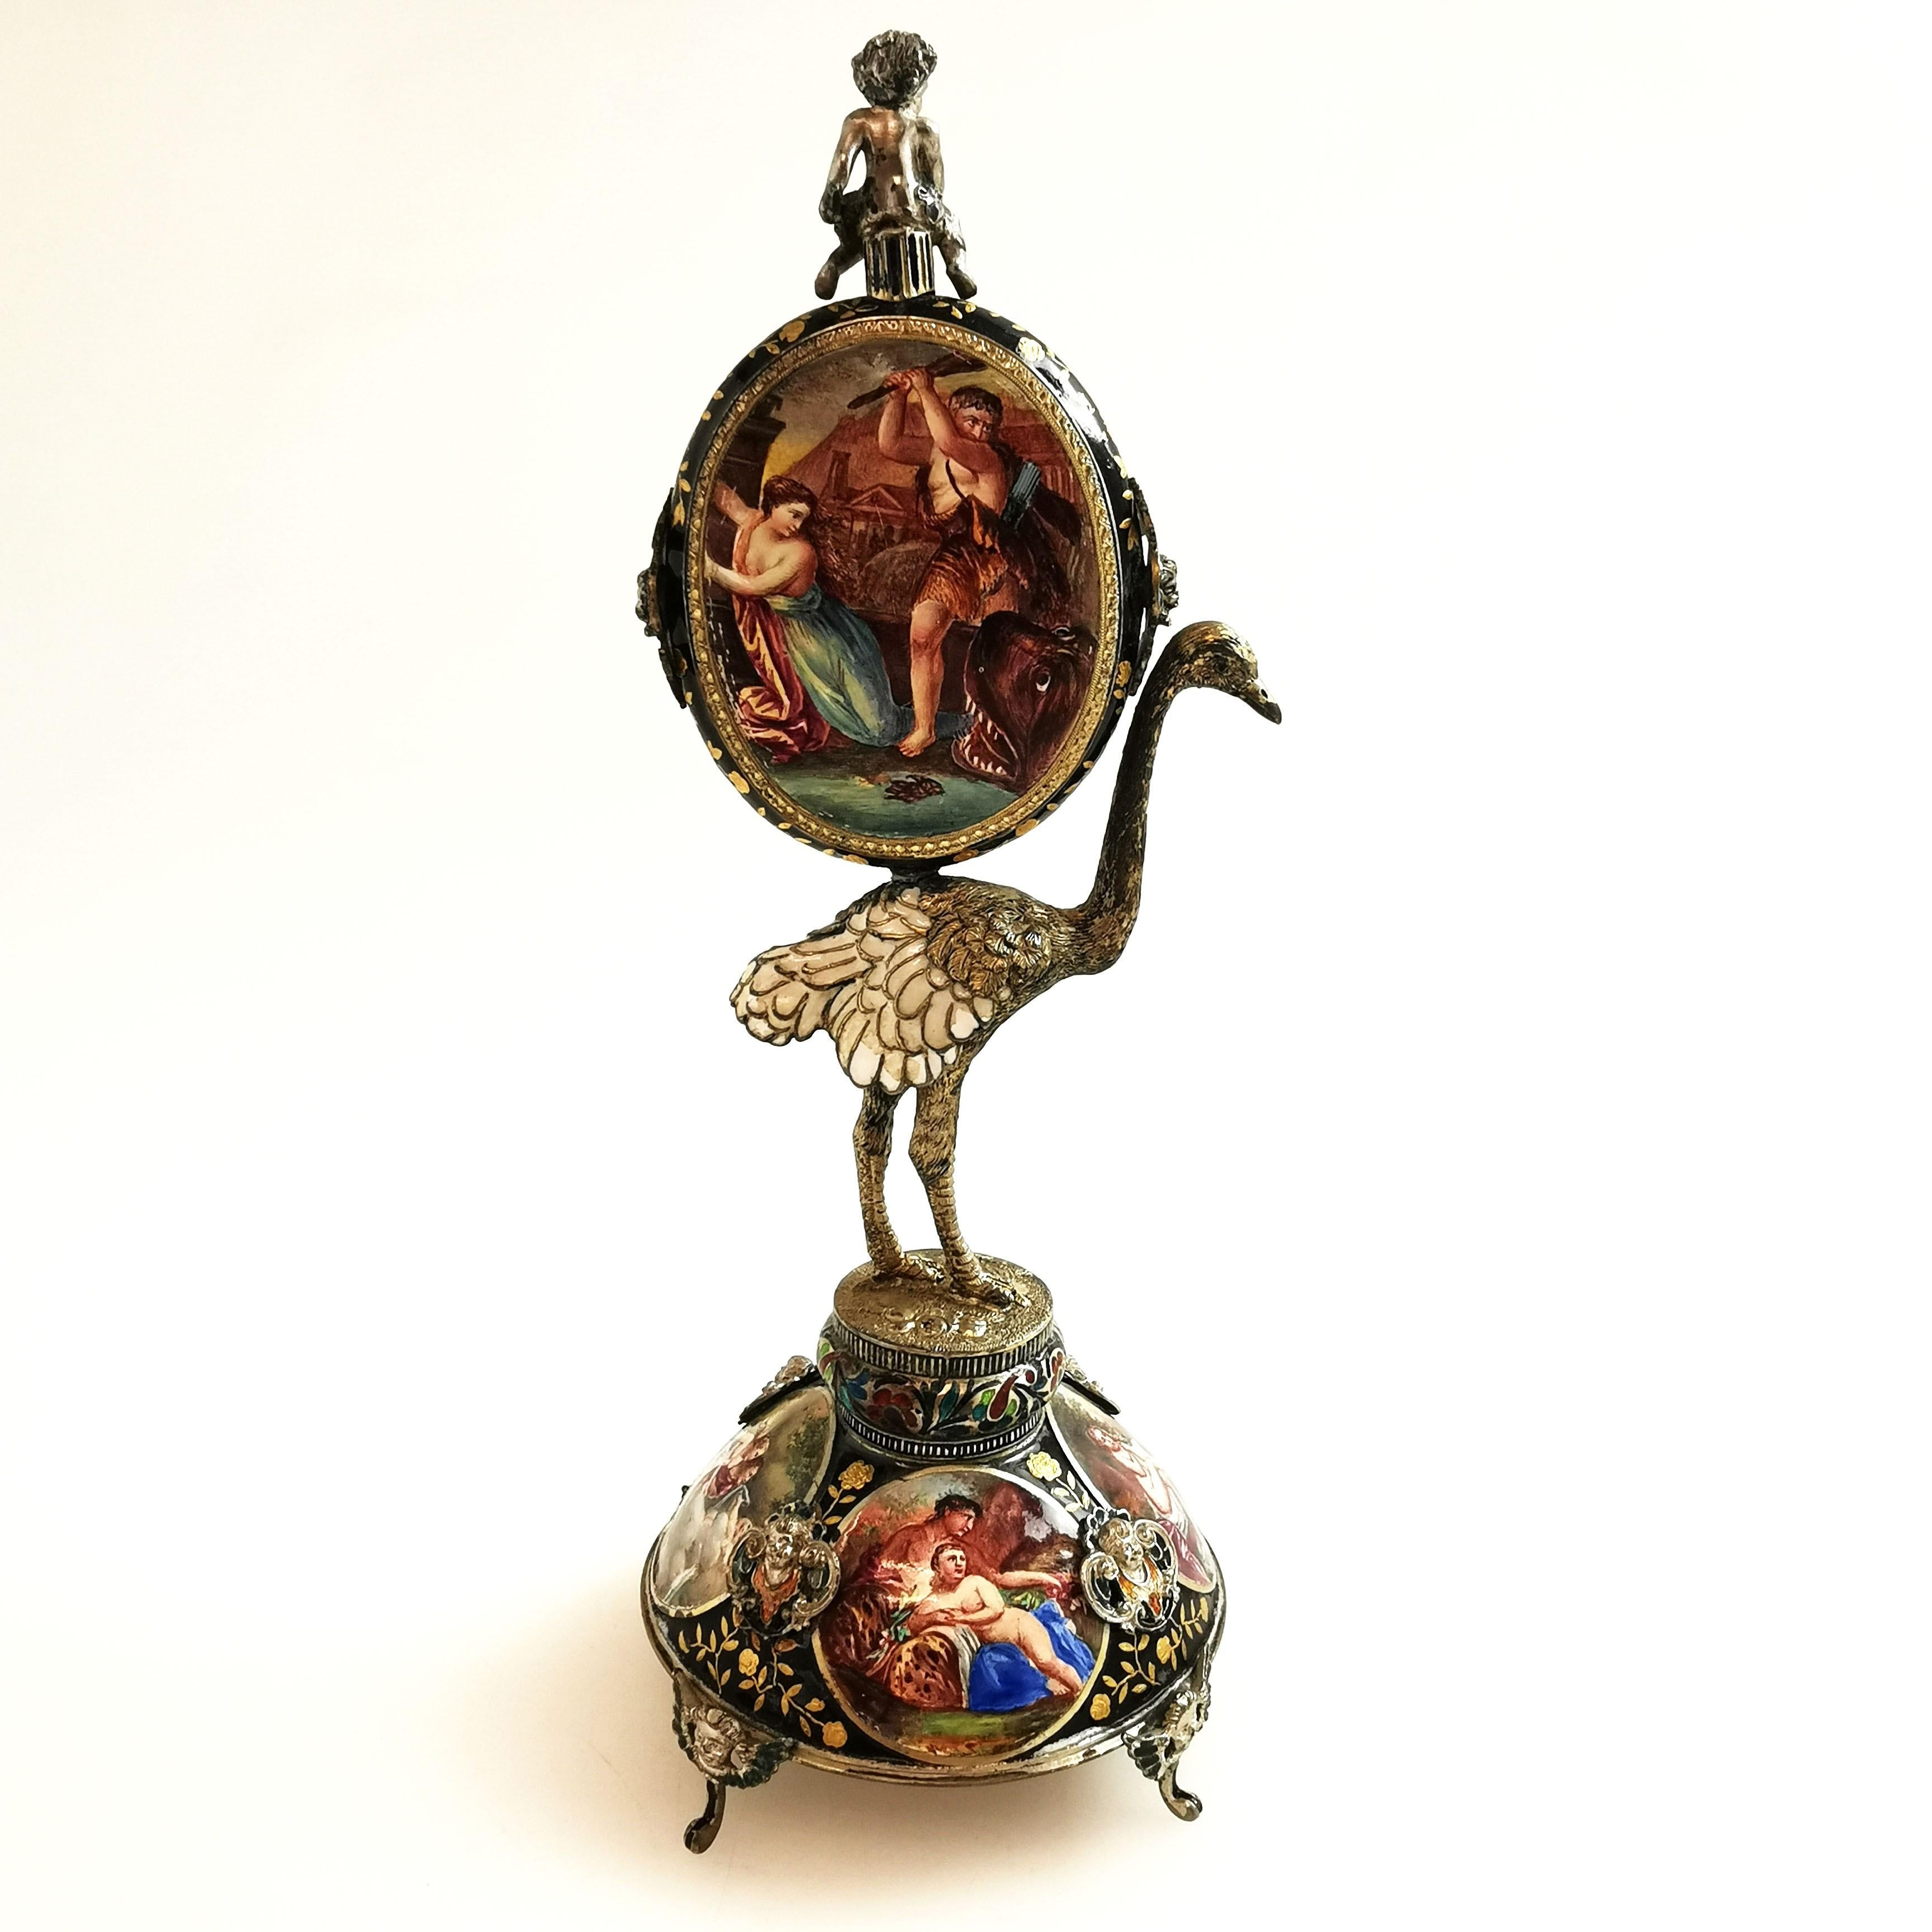 A pretty Antique Silver Gilt and Viennese Enamel Clock. This oval Clock rests on the back of an ostrich, which in turn stands on a domed base. The each surface of this Clock is covered in beautiful enamel details. The back of the Clock, the interior